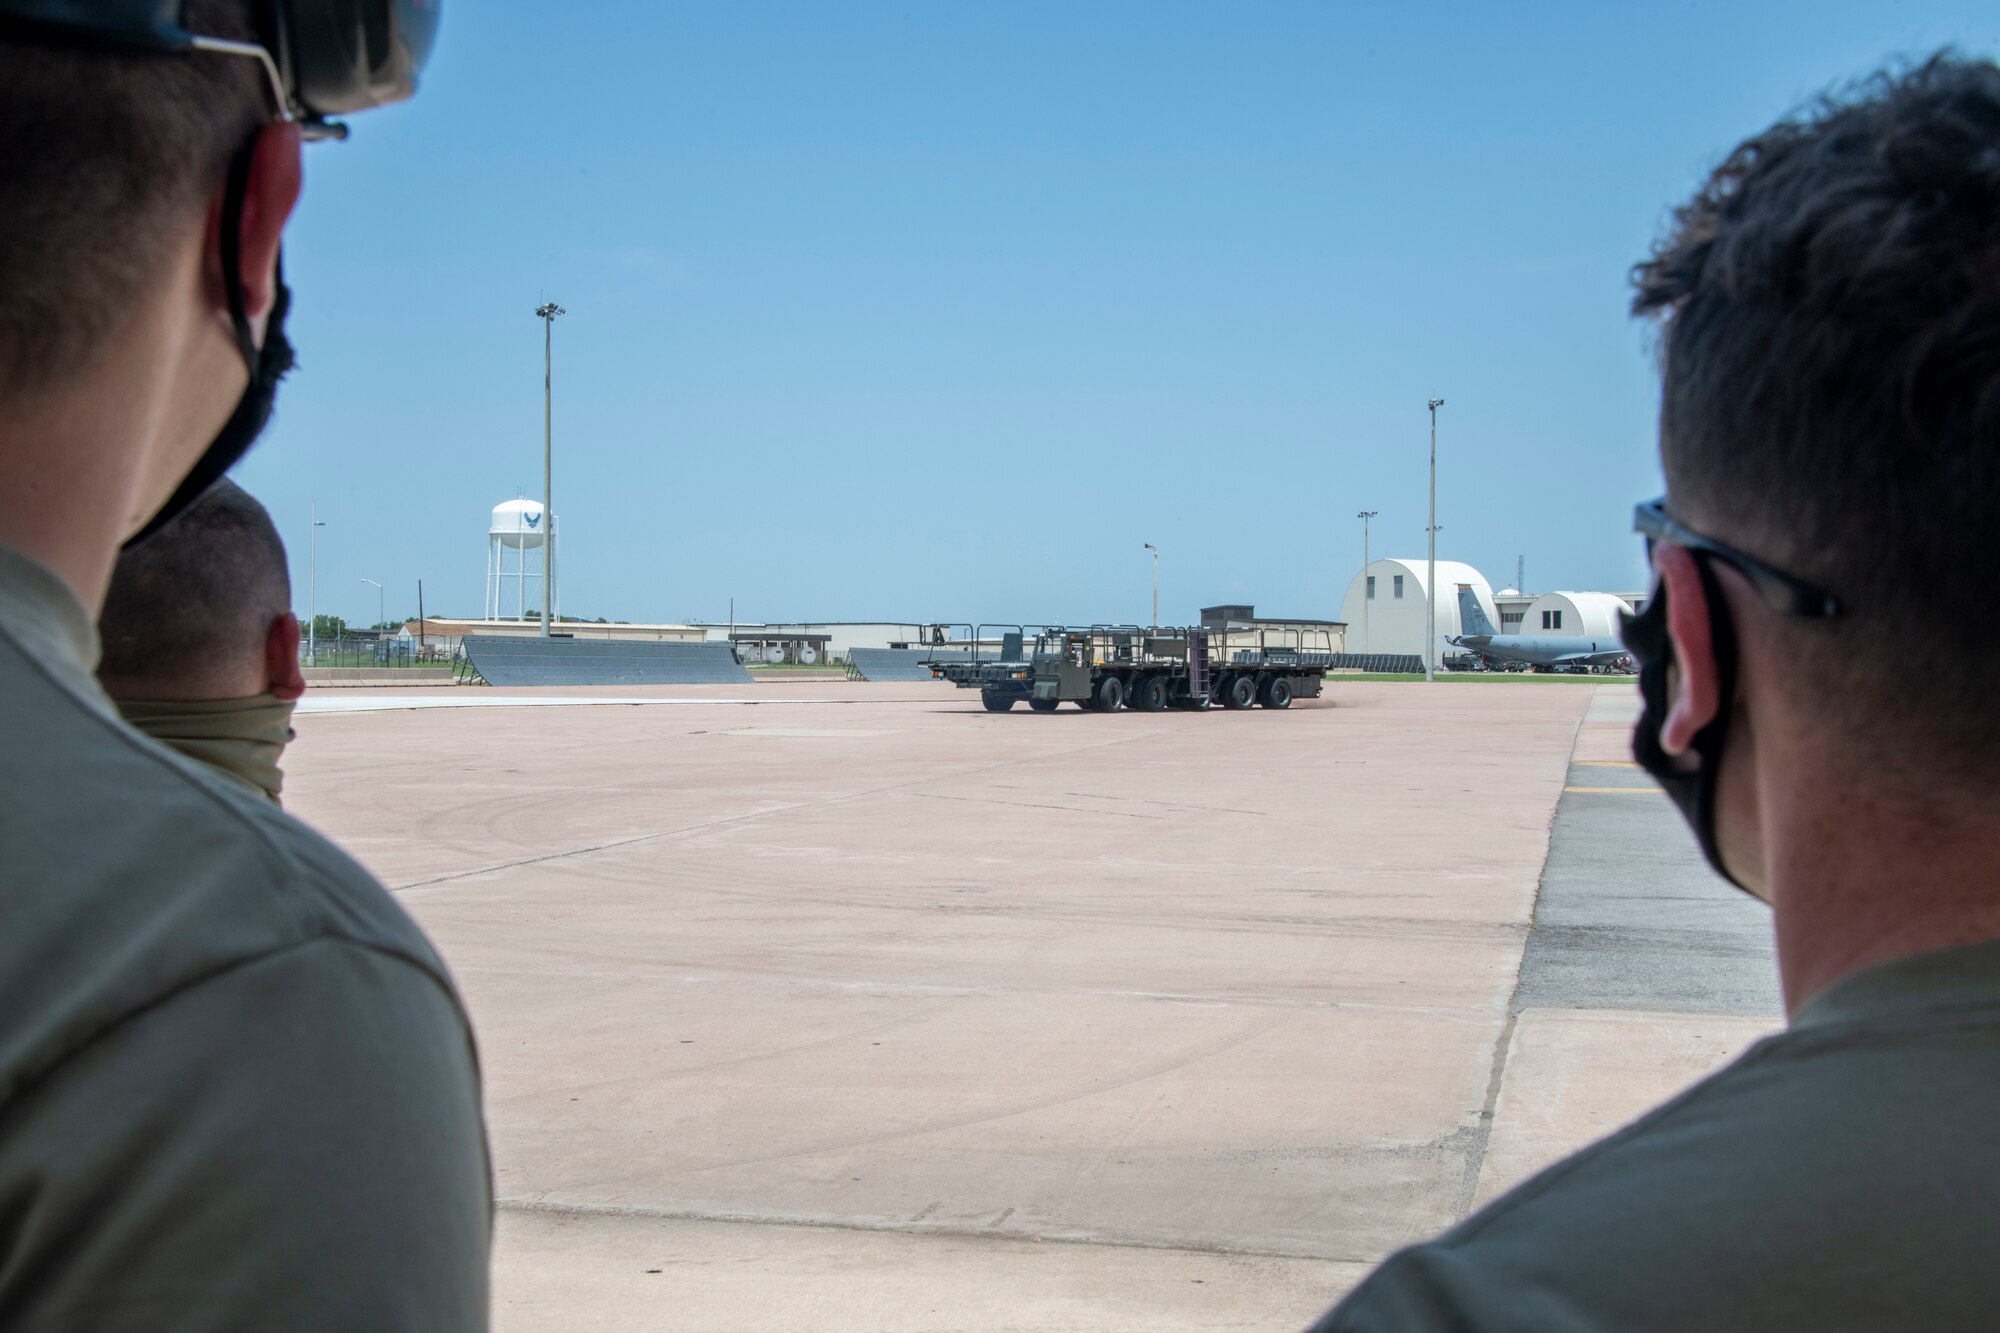 190th Logistics Readiness Squadron (LRS) Airmen watch as one of their members operates a Tunner 60K Aircraft Cargo Loader/Transporter at Altus Air Force Base, Oklahoma, July 27, 2021.